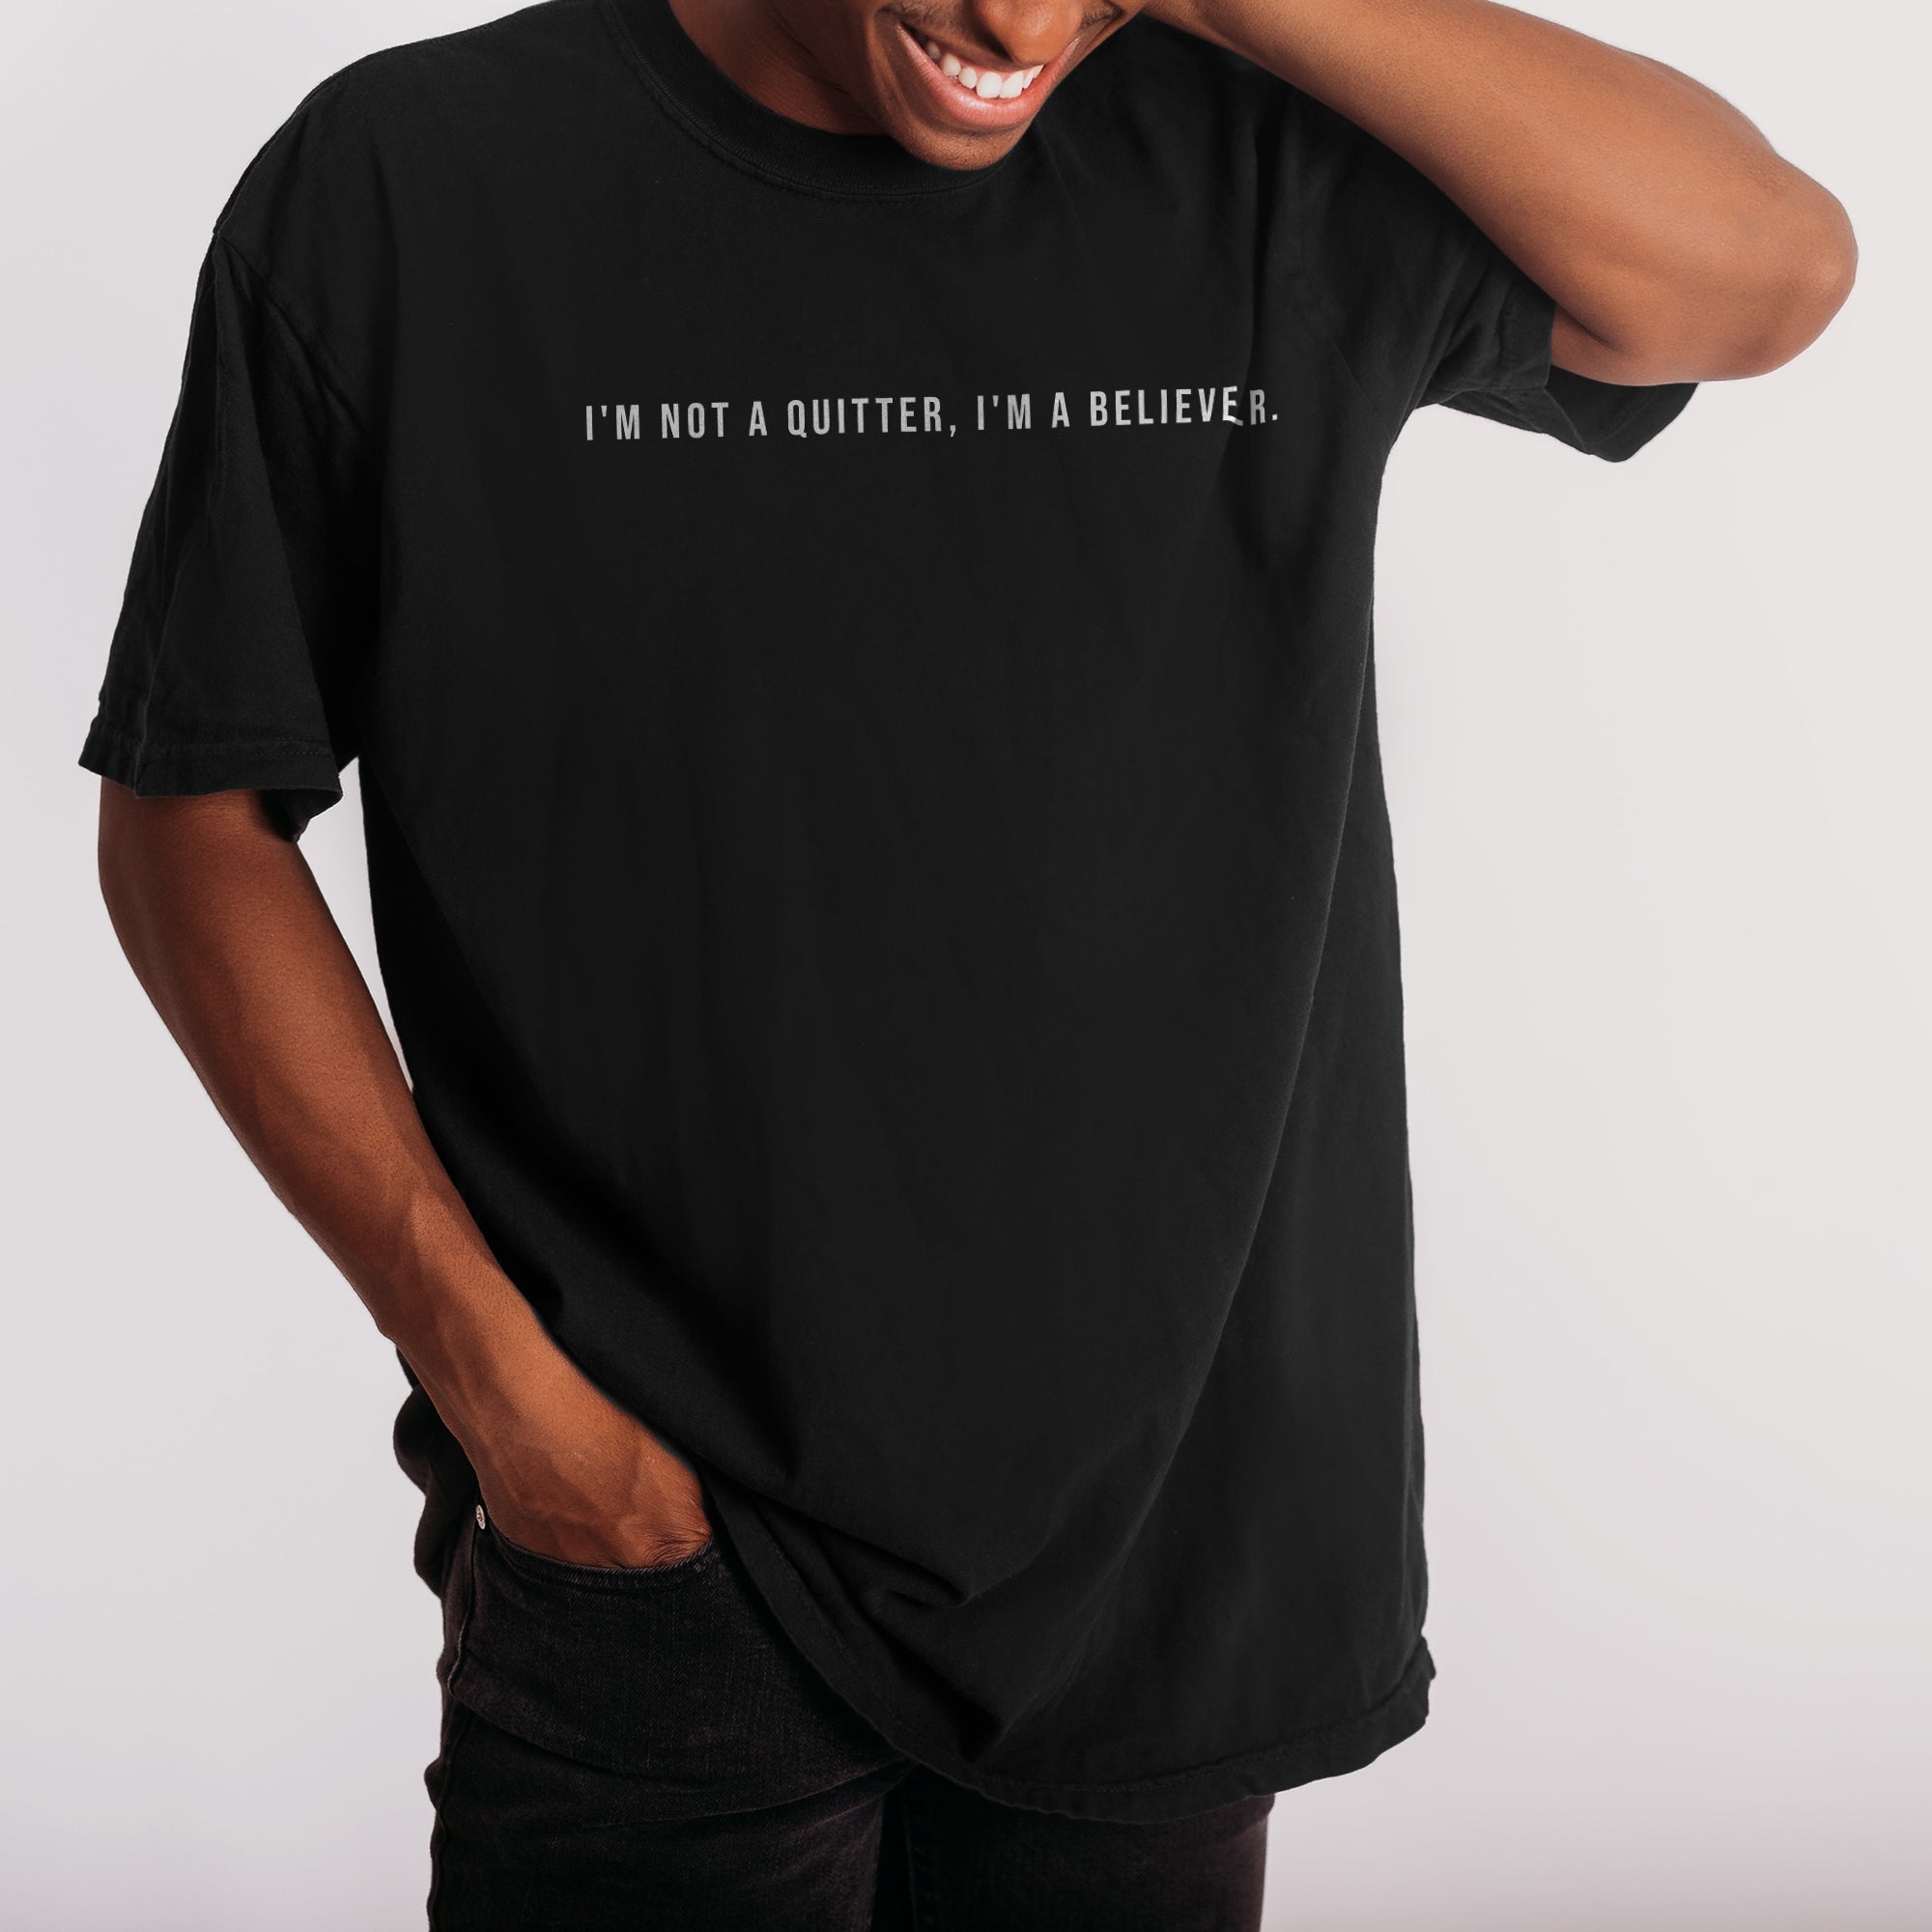 I'm Not a Quitter, I'm a Believer Boyfriend Crew Tee Solid Black Closeup Artwork and Texture